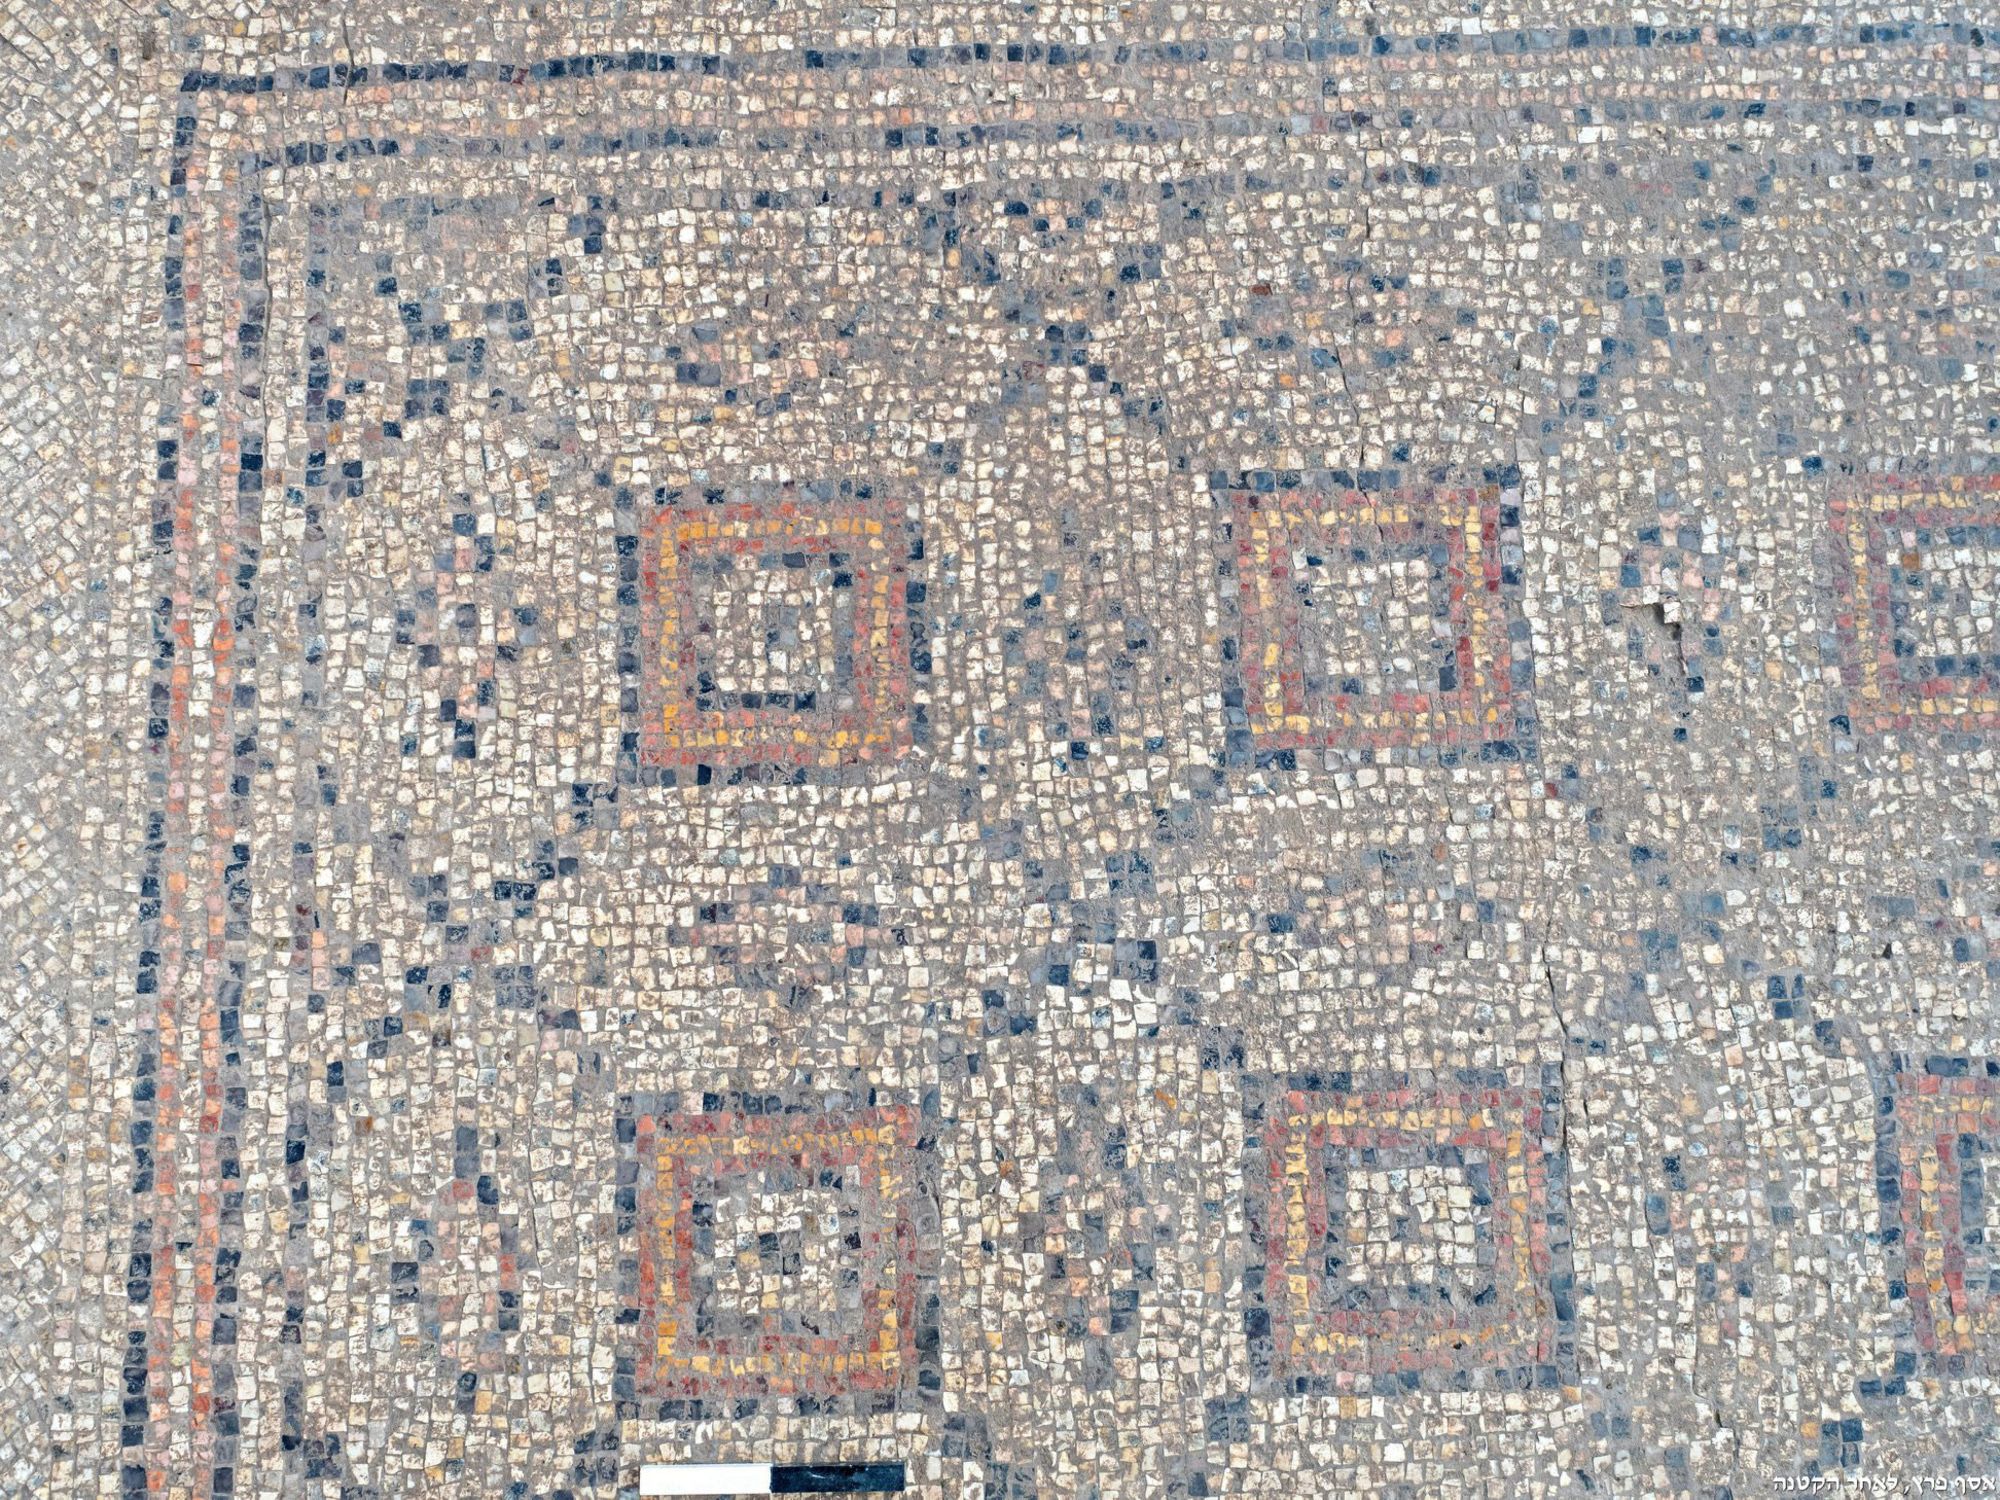 RESTRICTED 03 ancient mosaic israel scli intl